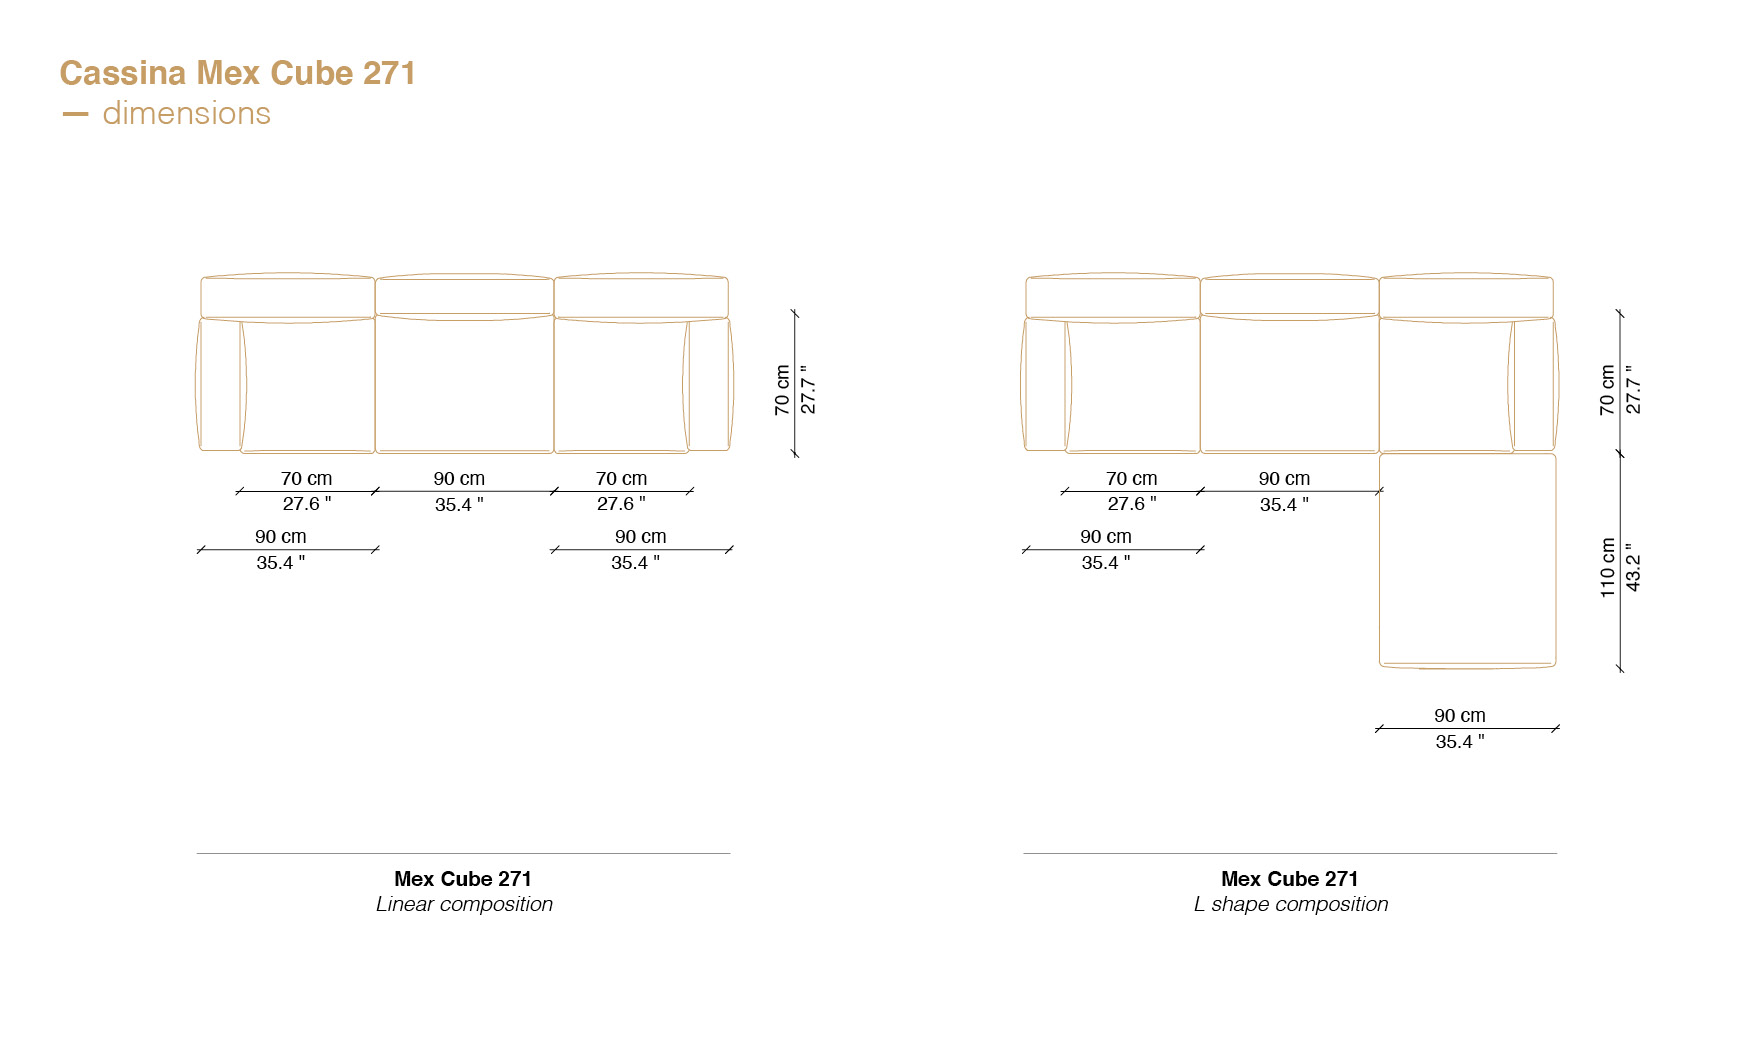 Mex Cube sofa compositions and different Cassina sofa price